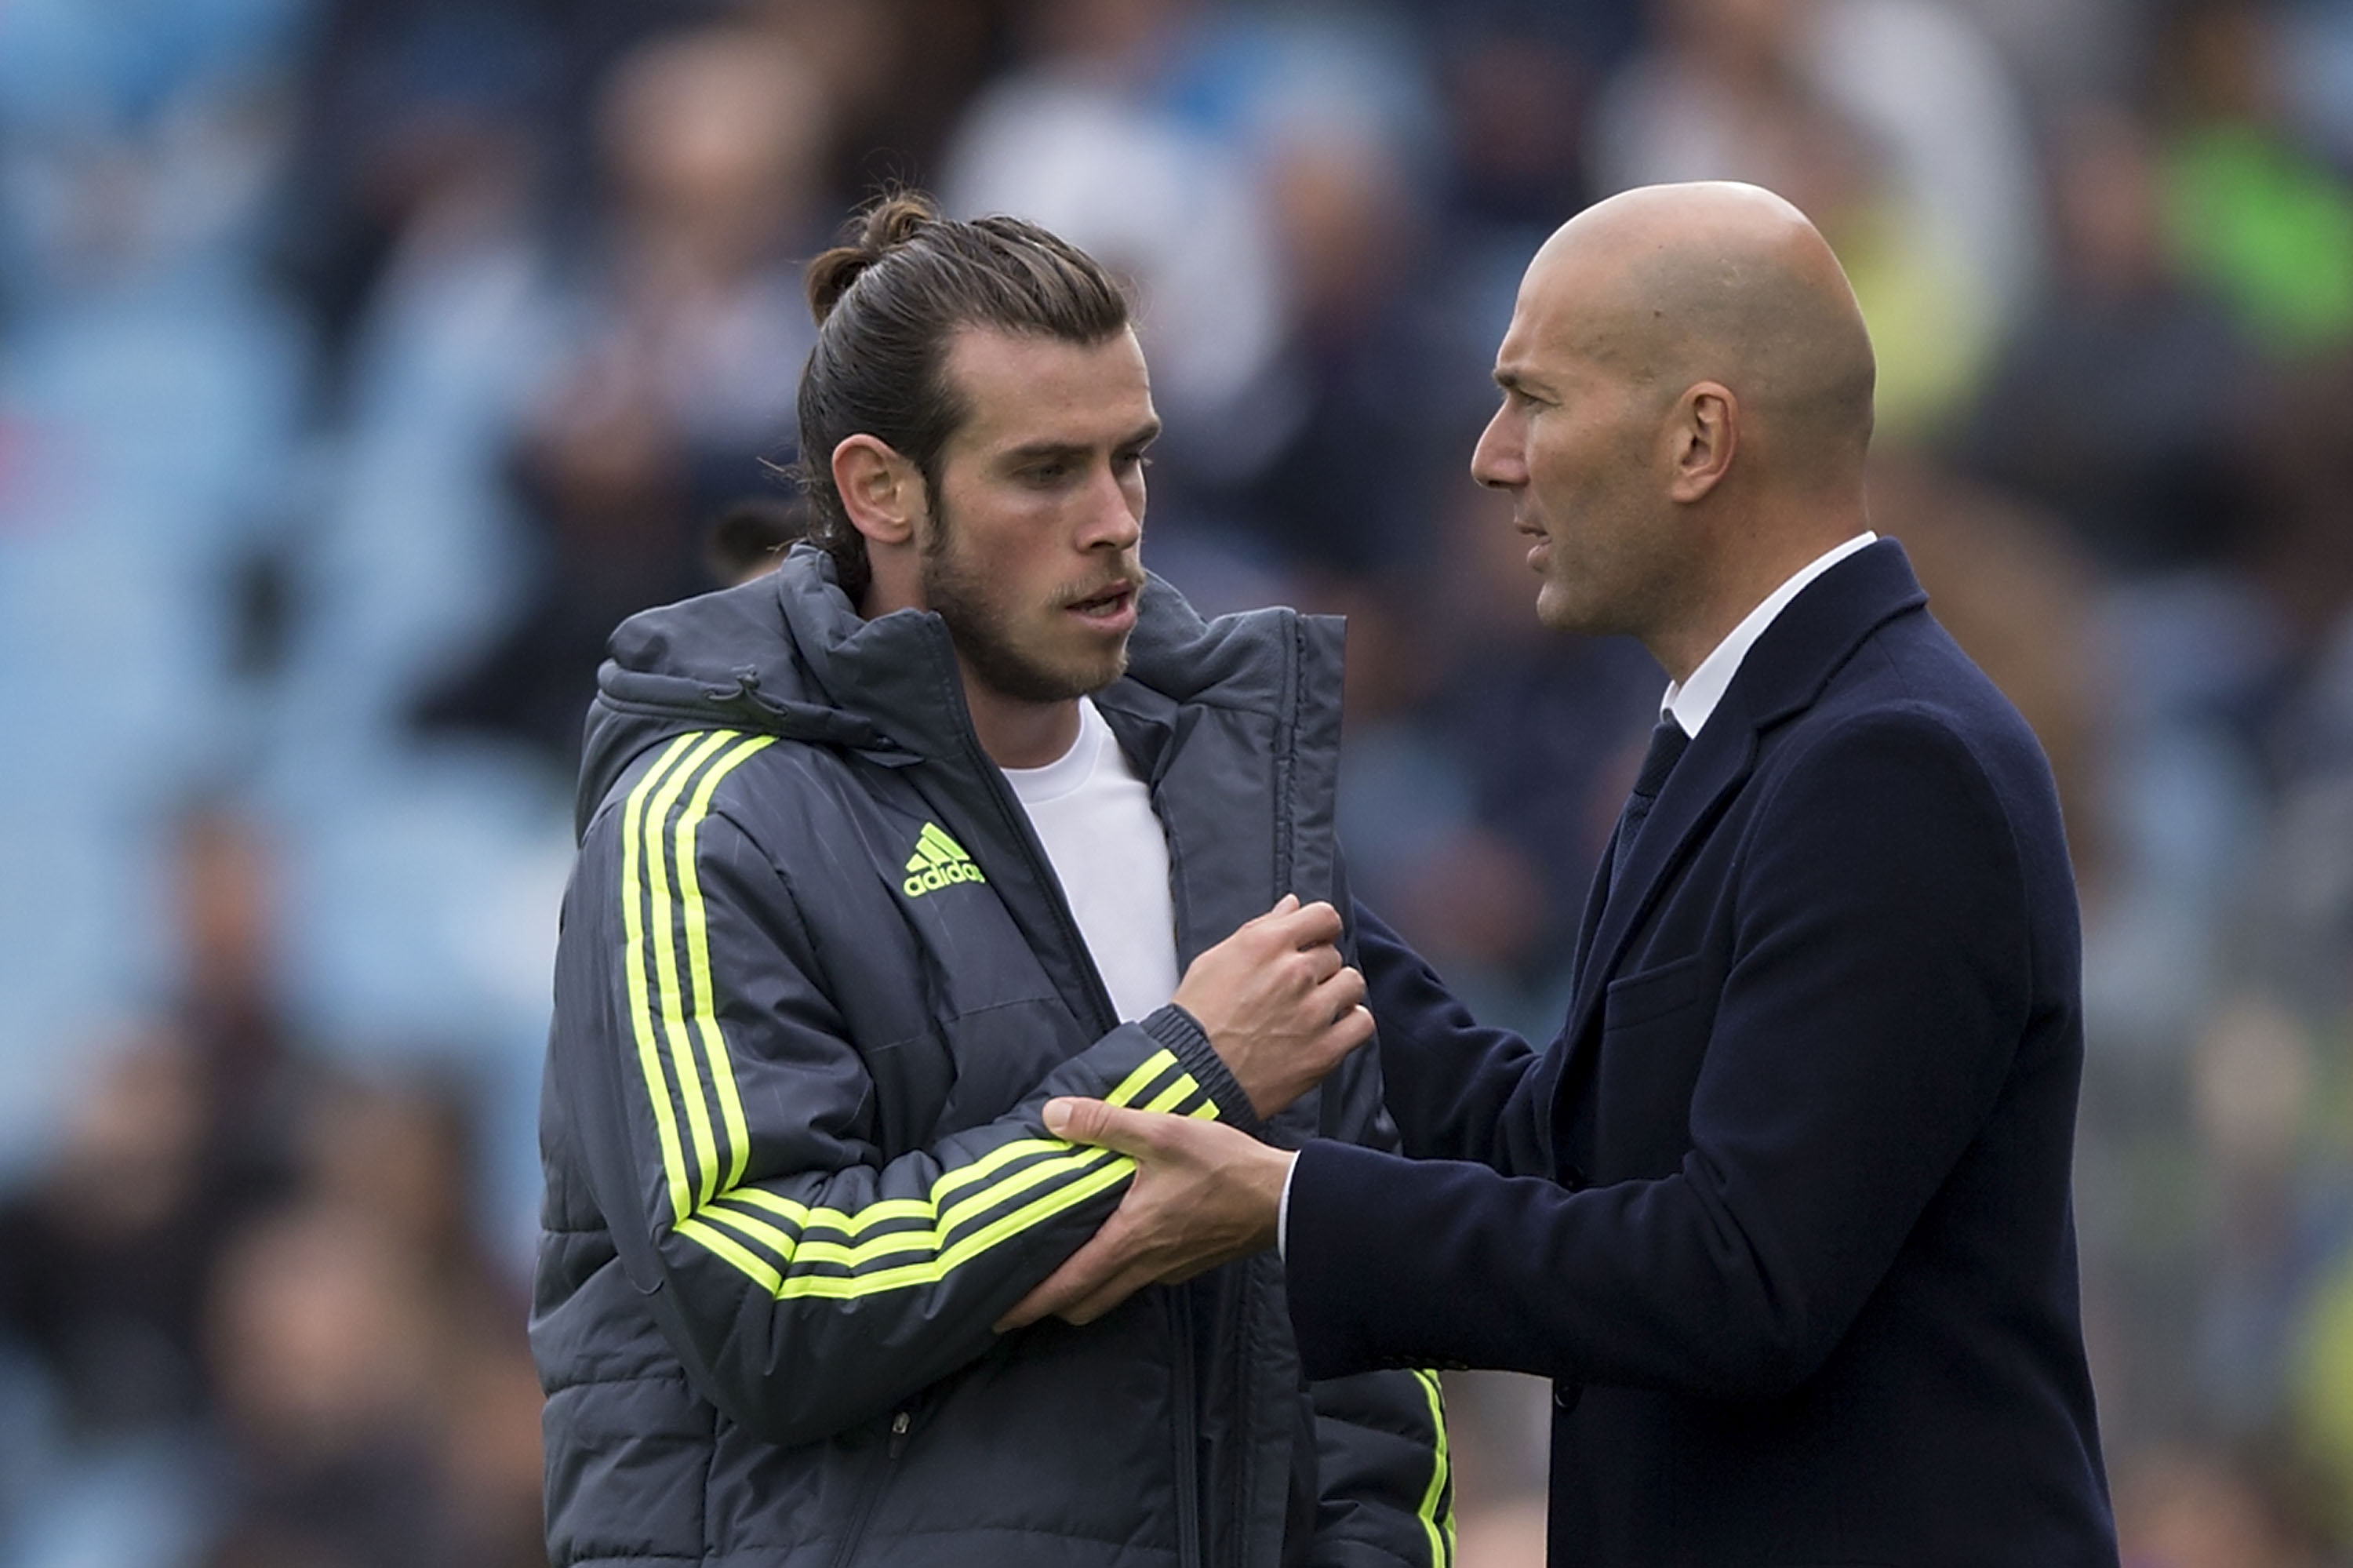 GETAFE, SPAIN - APRIL 16: Gareth Bale (L) of Real Madrid CF clashes hands with his head coach Zinedine Zidane (R) as he leaves the pithc  during the La Liga match between Getafe CF and Real Madrid CF at Coliseum Alfonso Perez on April 16, 2016 in Getafe, Spain.  (Photo by Gonzalo Arroyo Moreno/Getty Images)